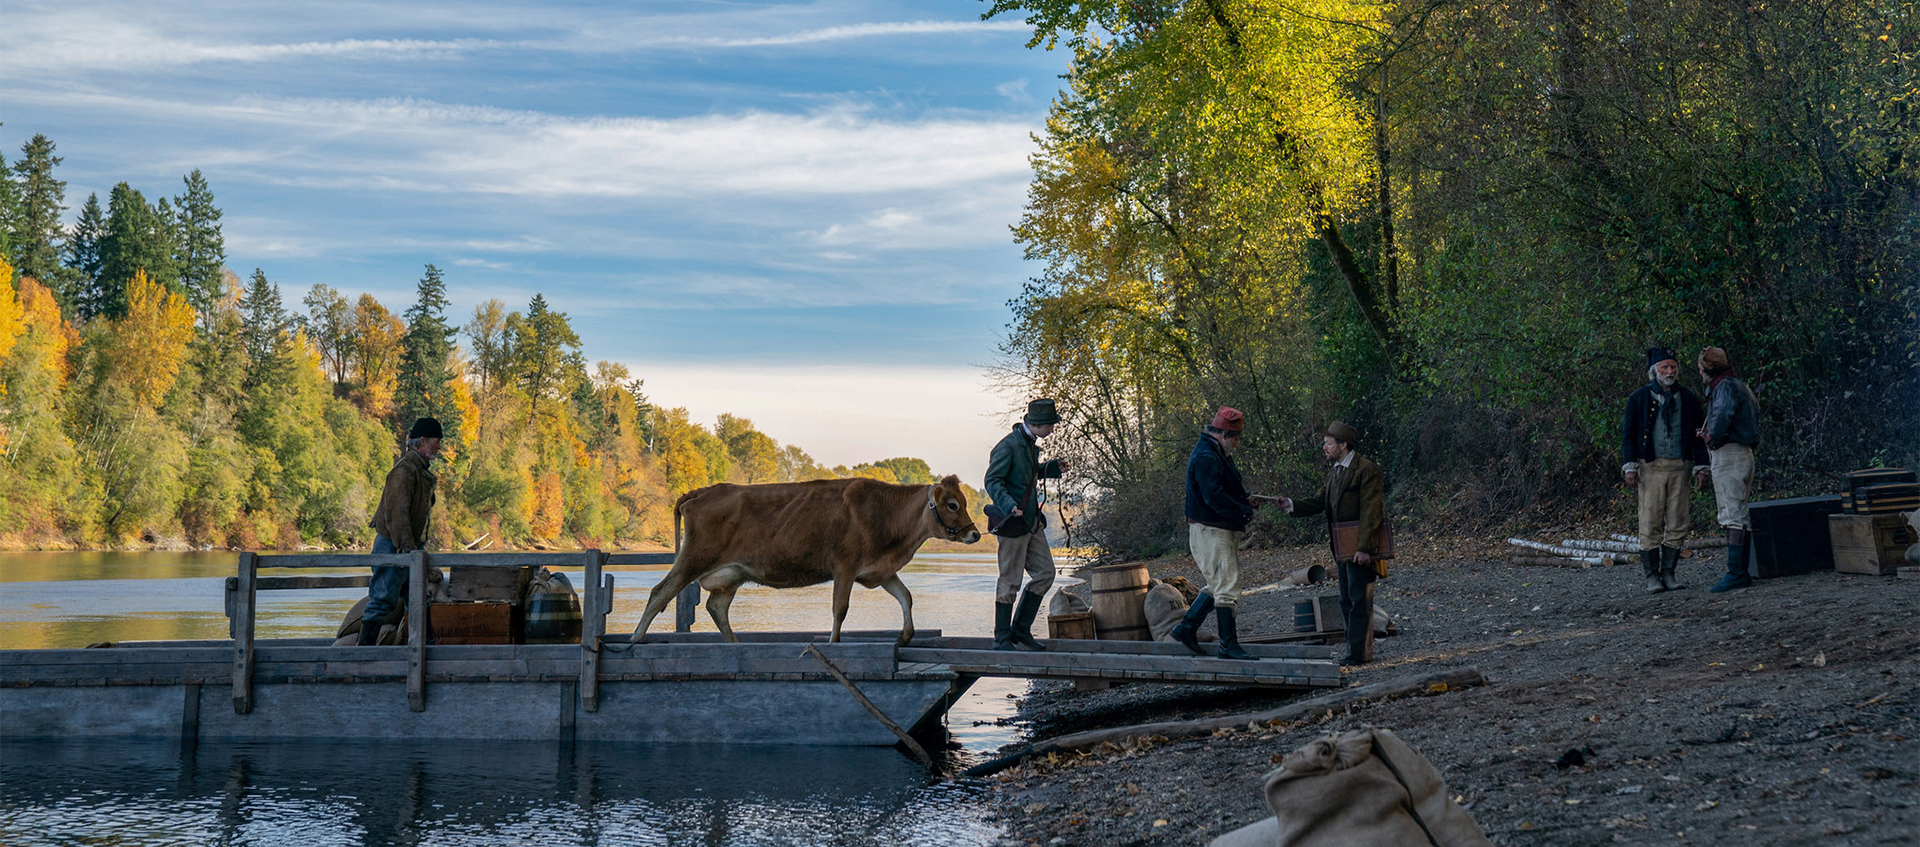 Three people cross a river by bridge. In between them a cow pulls suitcases and luggage. They approach the show where three other people wait for them.